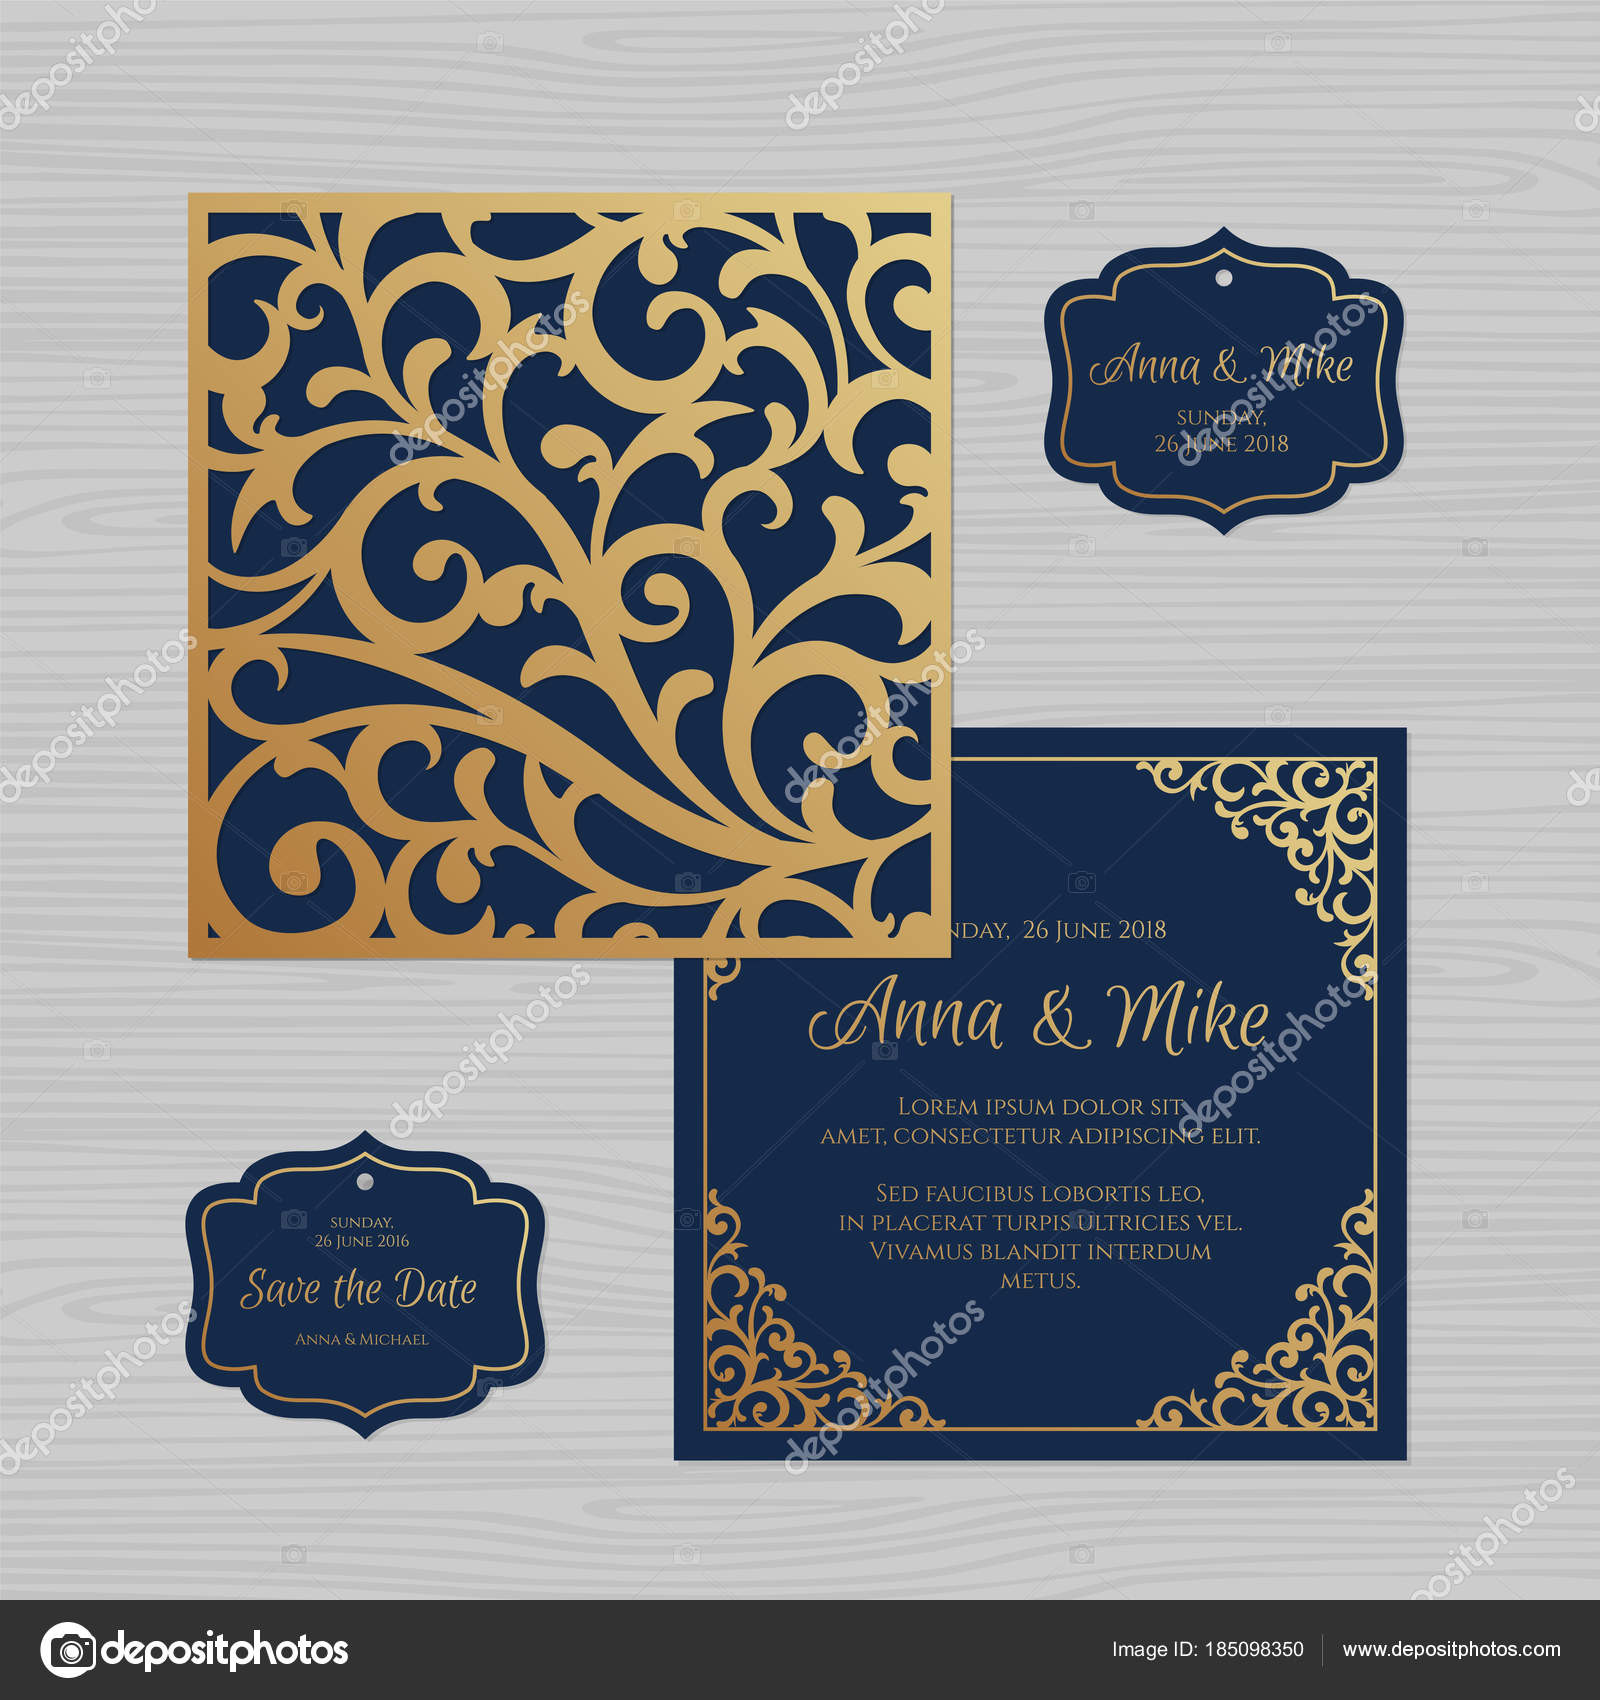 Wedding Invitation Paper Stock
 Wedding invitation or greeting card with vintage ornament